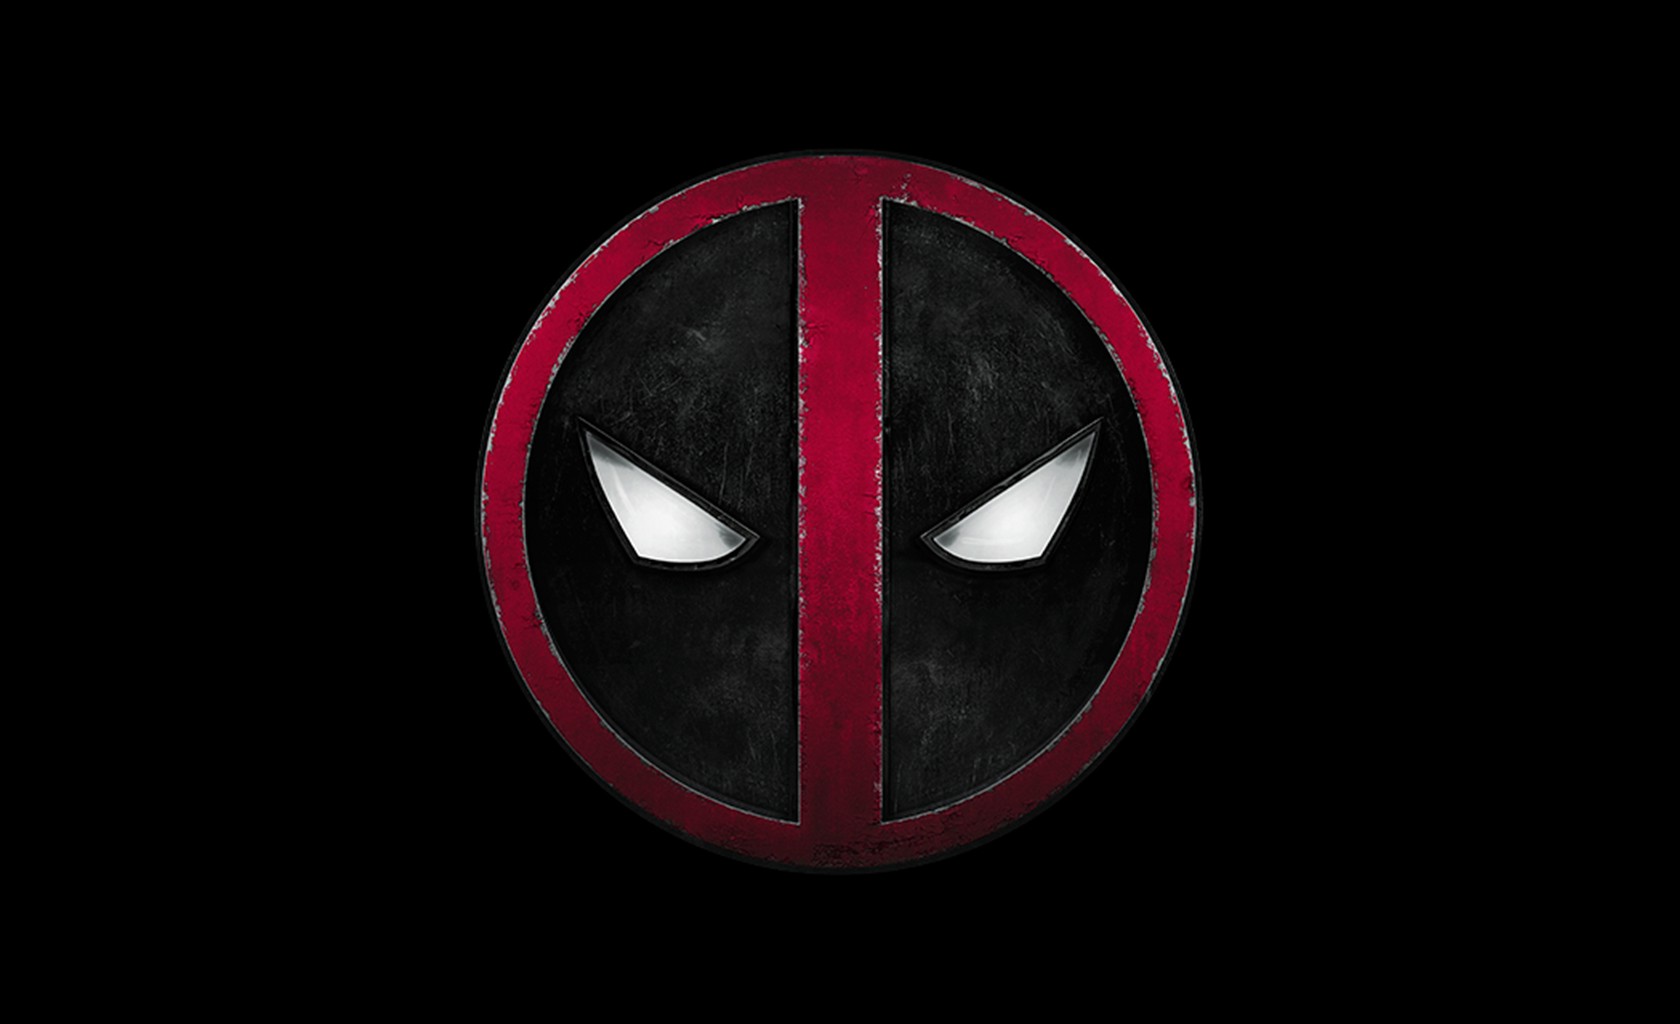  Deadpool  Wallpapers  HD  Desktop and Mobile Backgrounds 